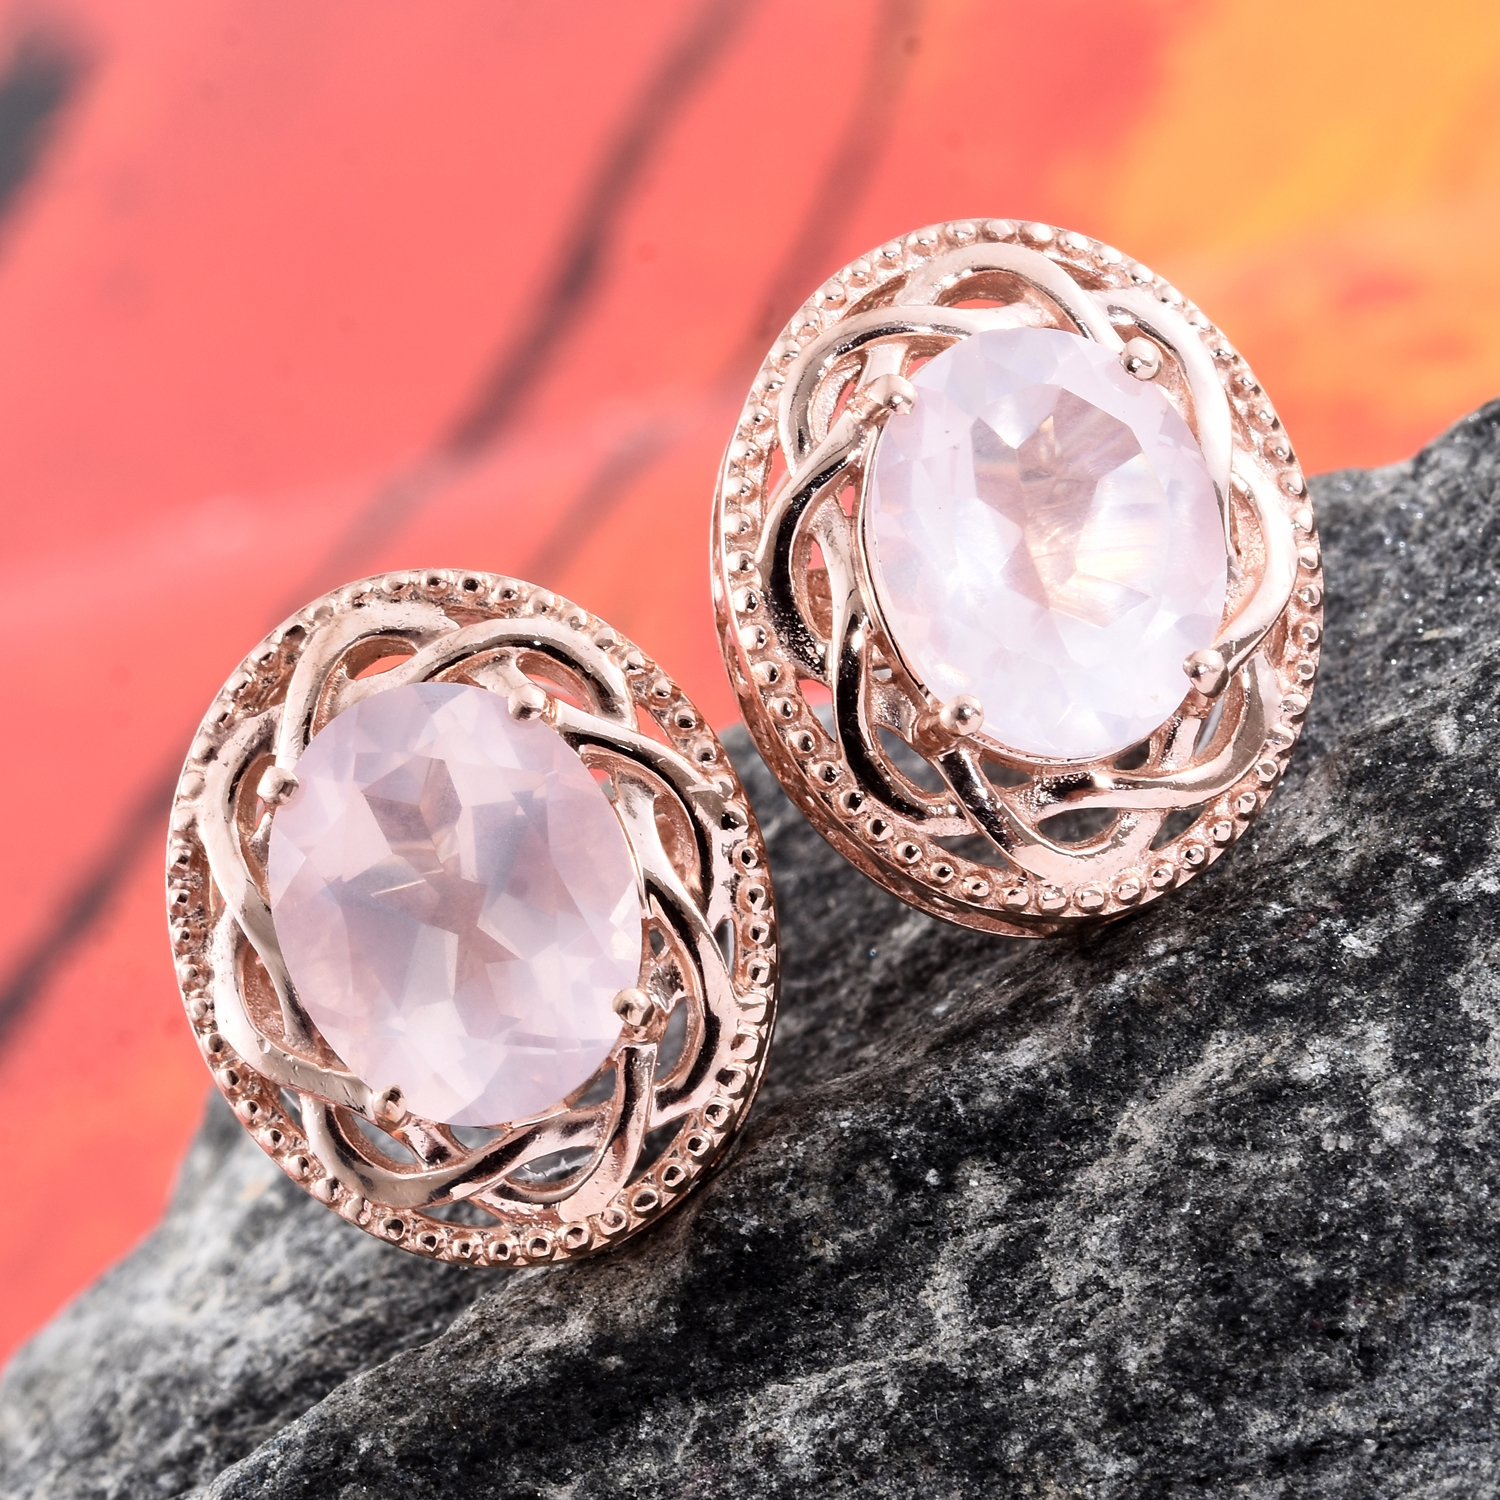 Galilea Rose Quartz 14K Rose Gold Over Sterling Silver Oval Stud Earrings TGW 4.86 cts. - Houzz of DVA Boutique